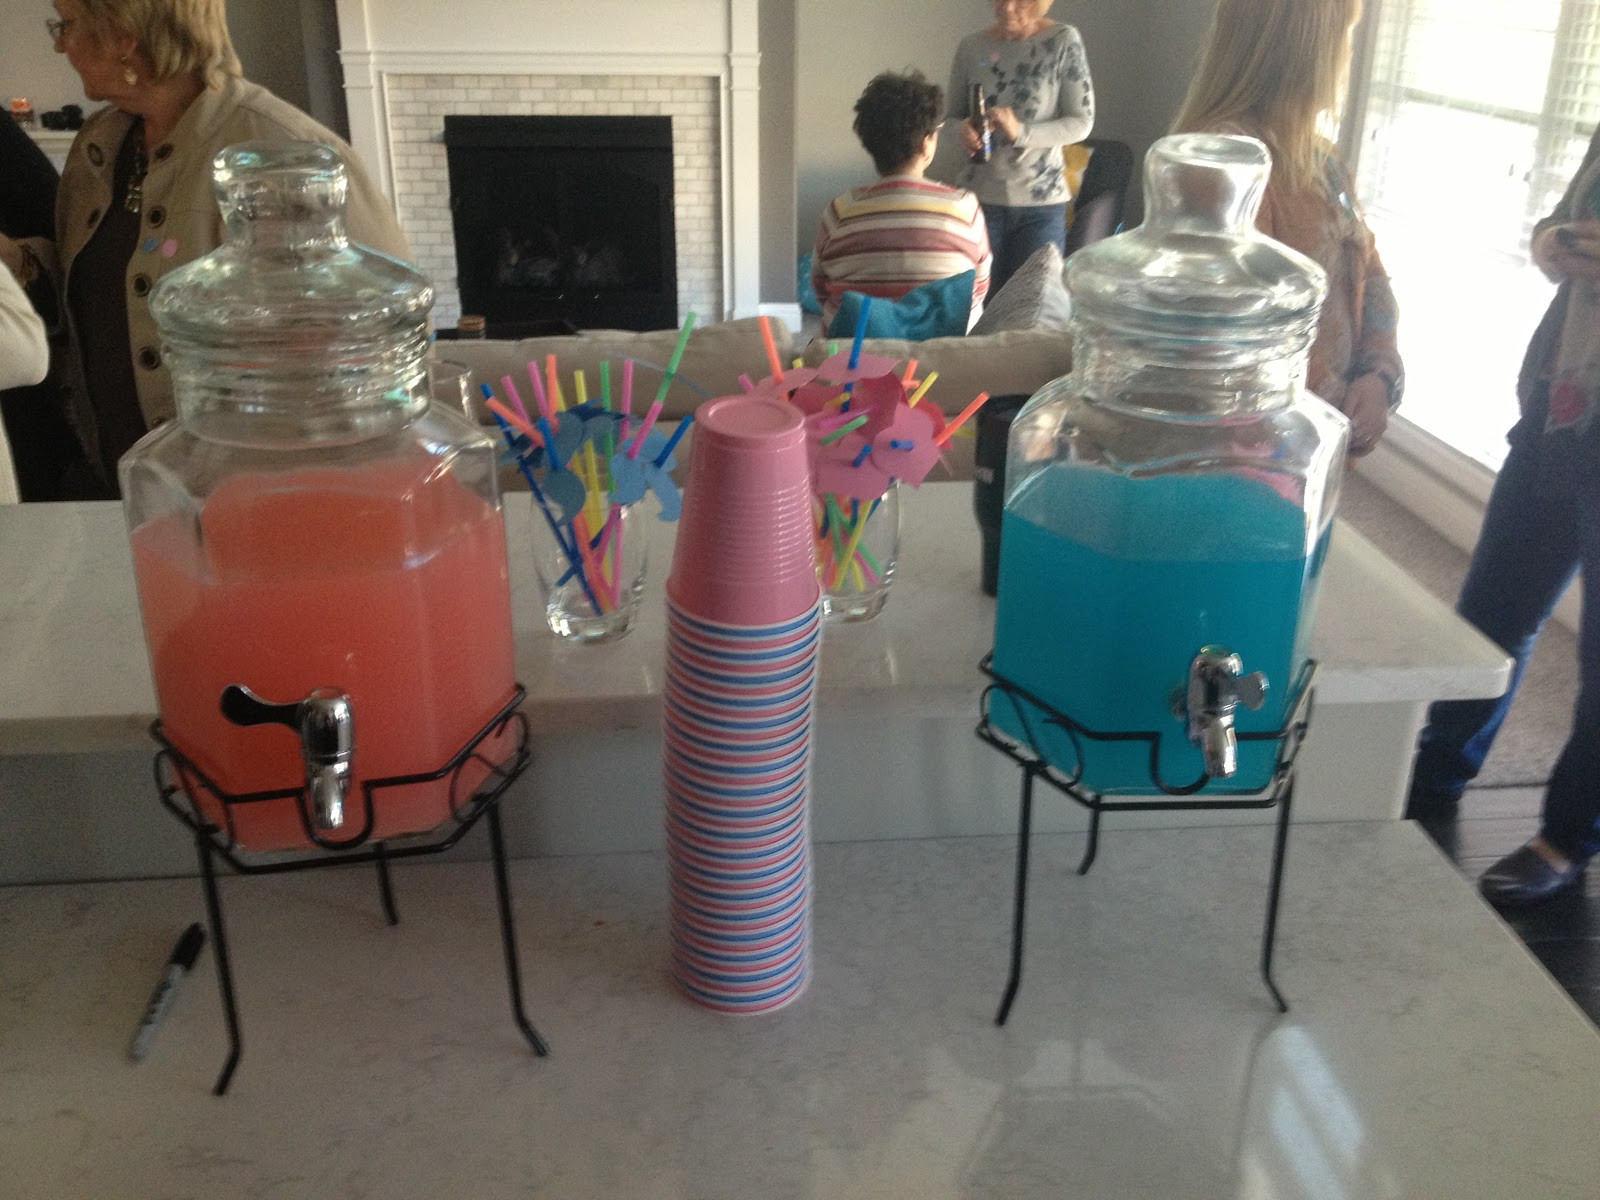 Twins Gender Reveal Party Ideas
 Recently Rimini Our Gender Reveal Party for the Twins